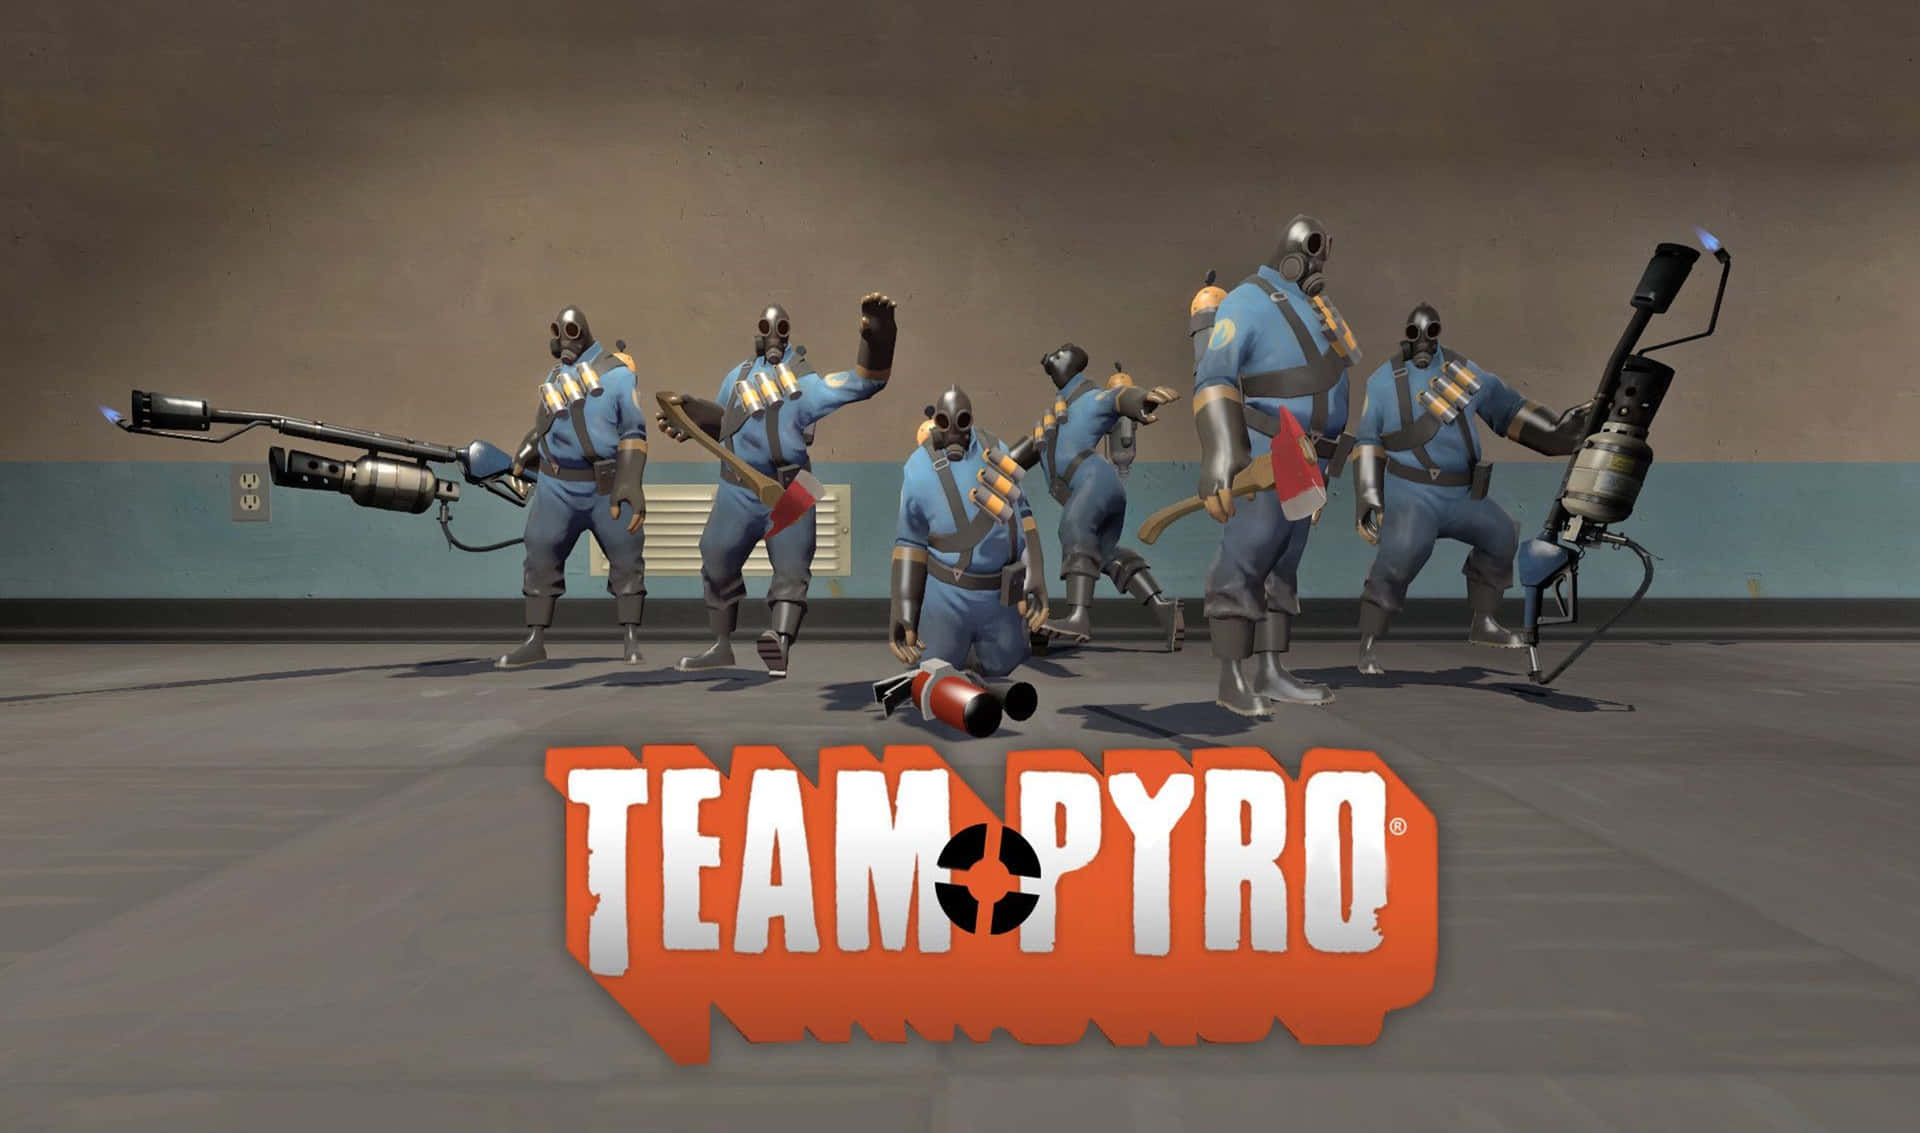 Exciting Team Fortress 2 Game Action Scene